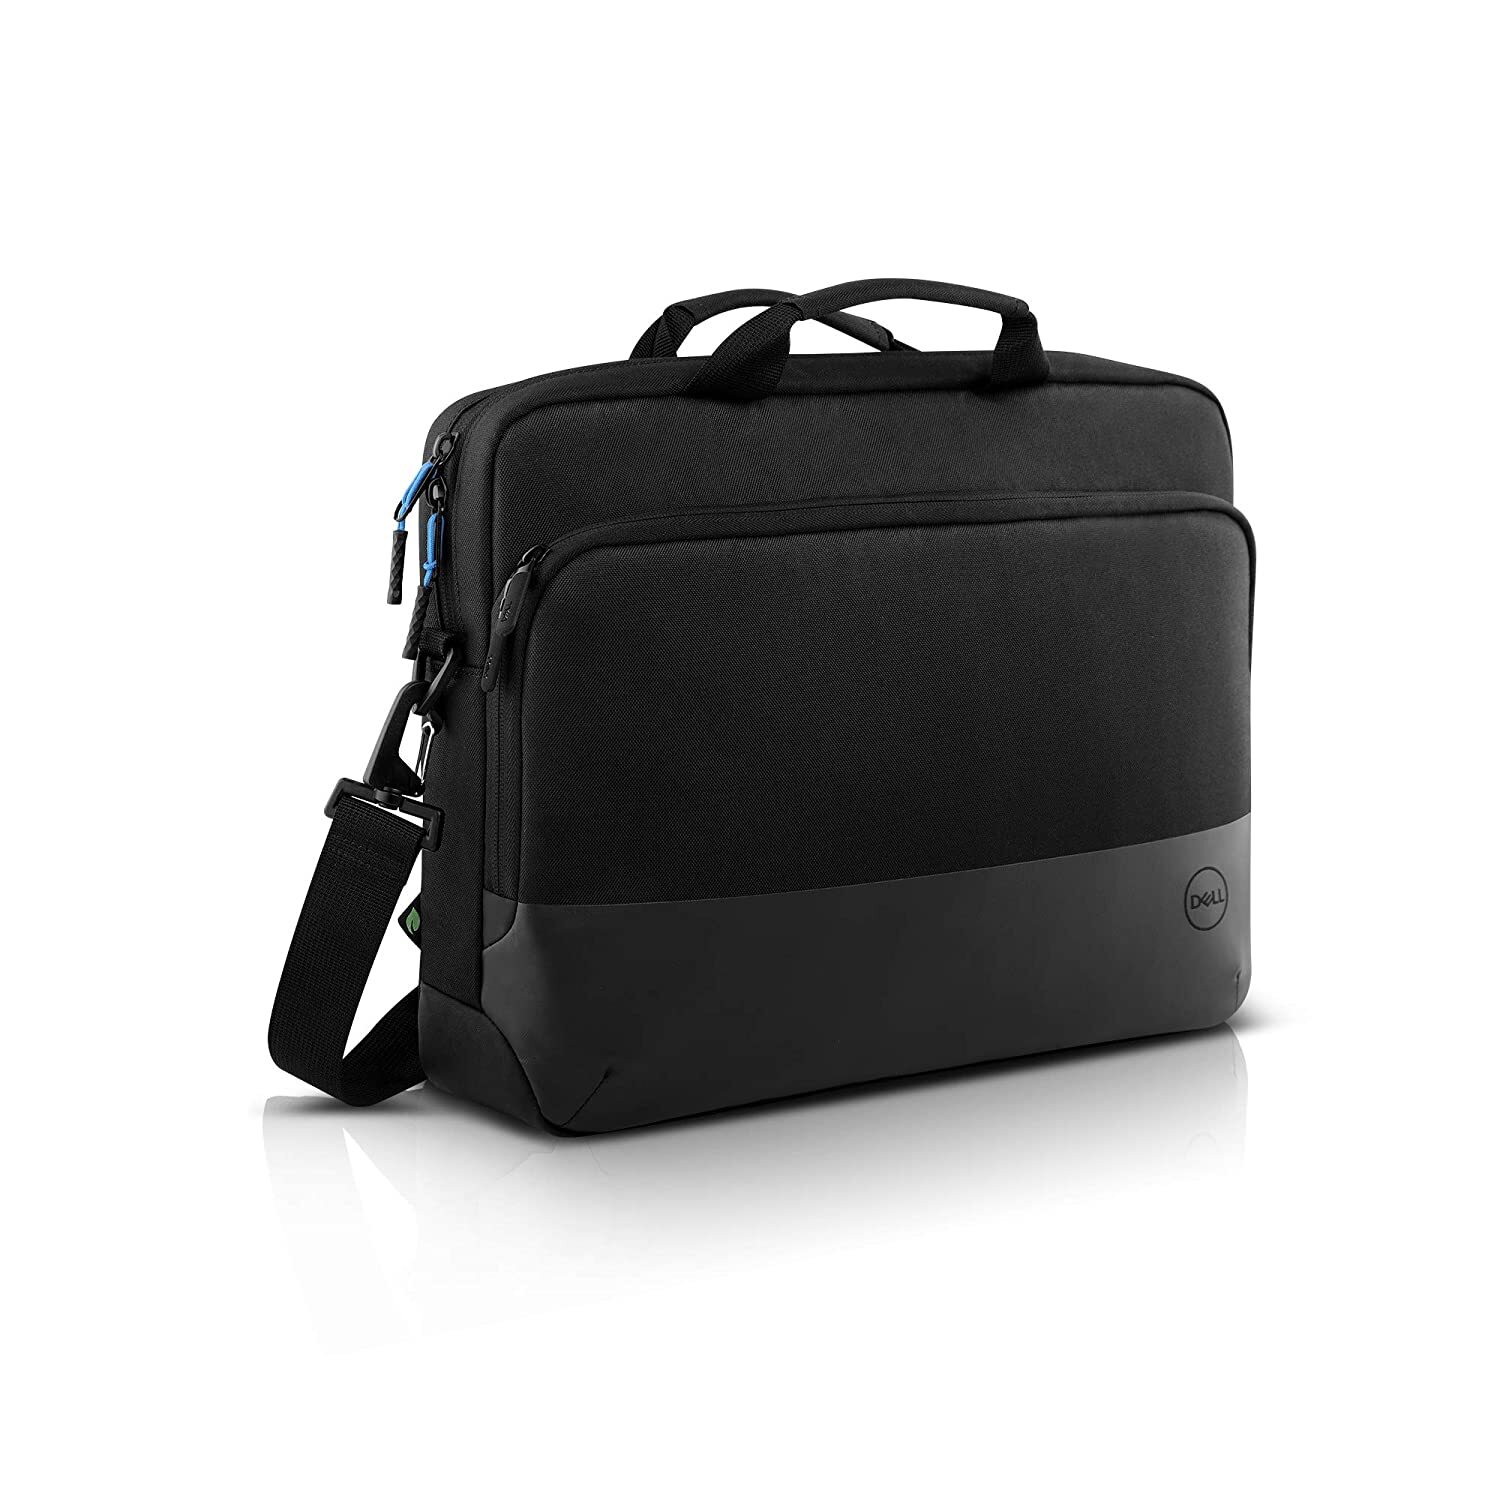 Dell Pro Briefcase 15 (PO1520C), Made with an Earth-Friendly Solution-Dyeing Process-M000000000393 www.mysocially.com